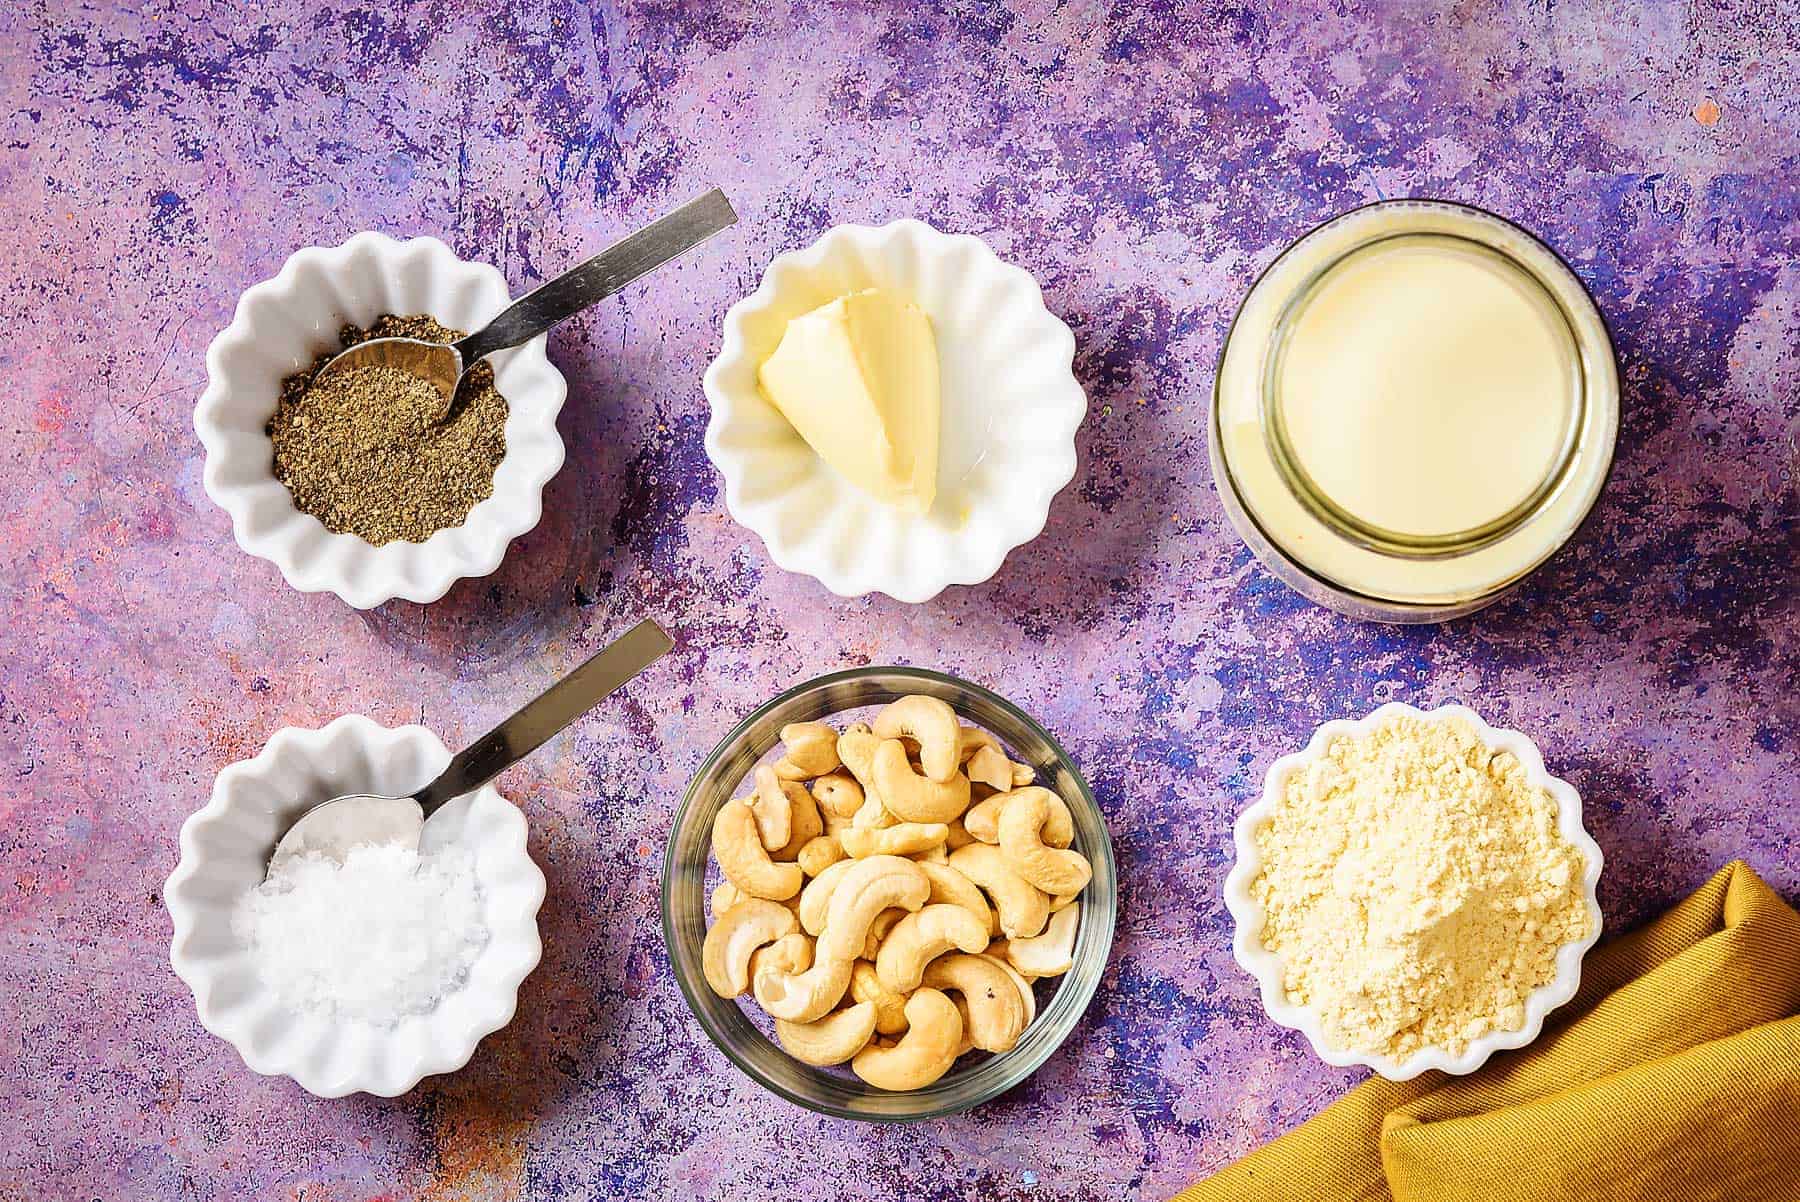 Ingredients for cashew sauce